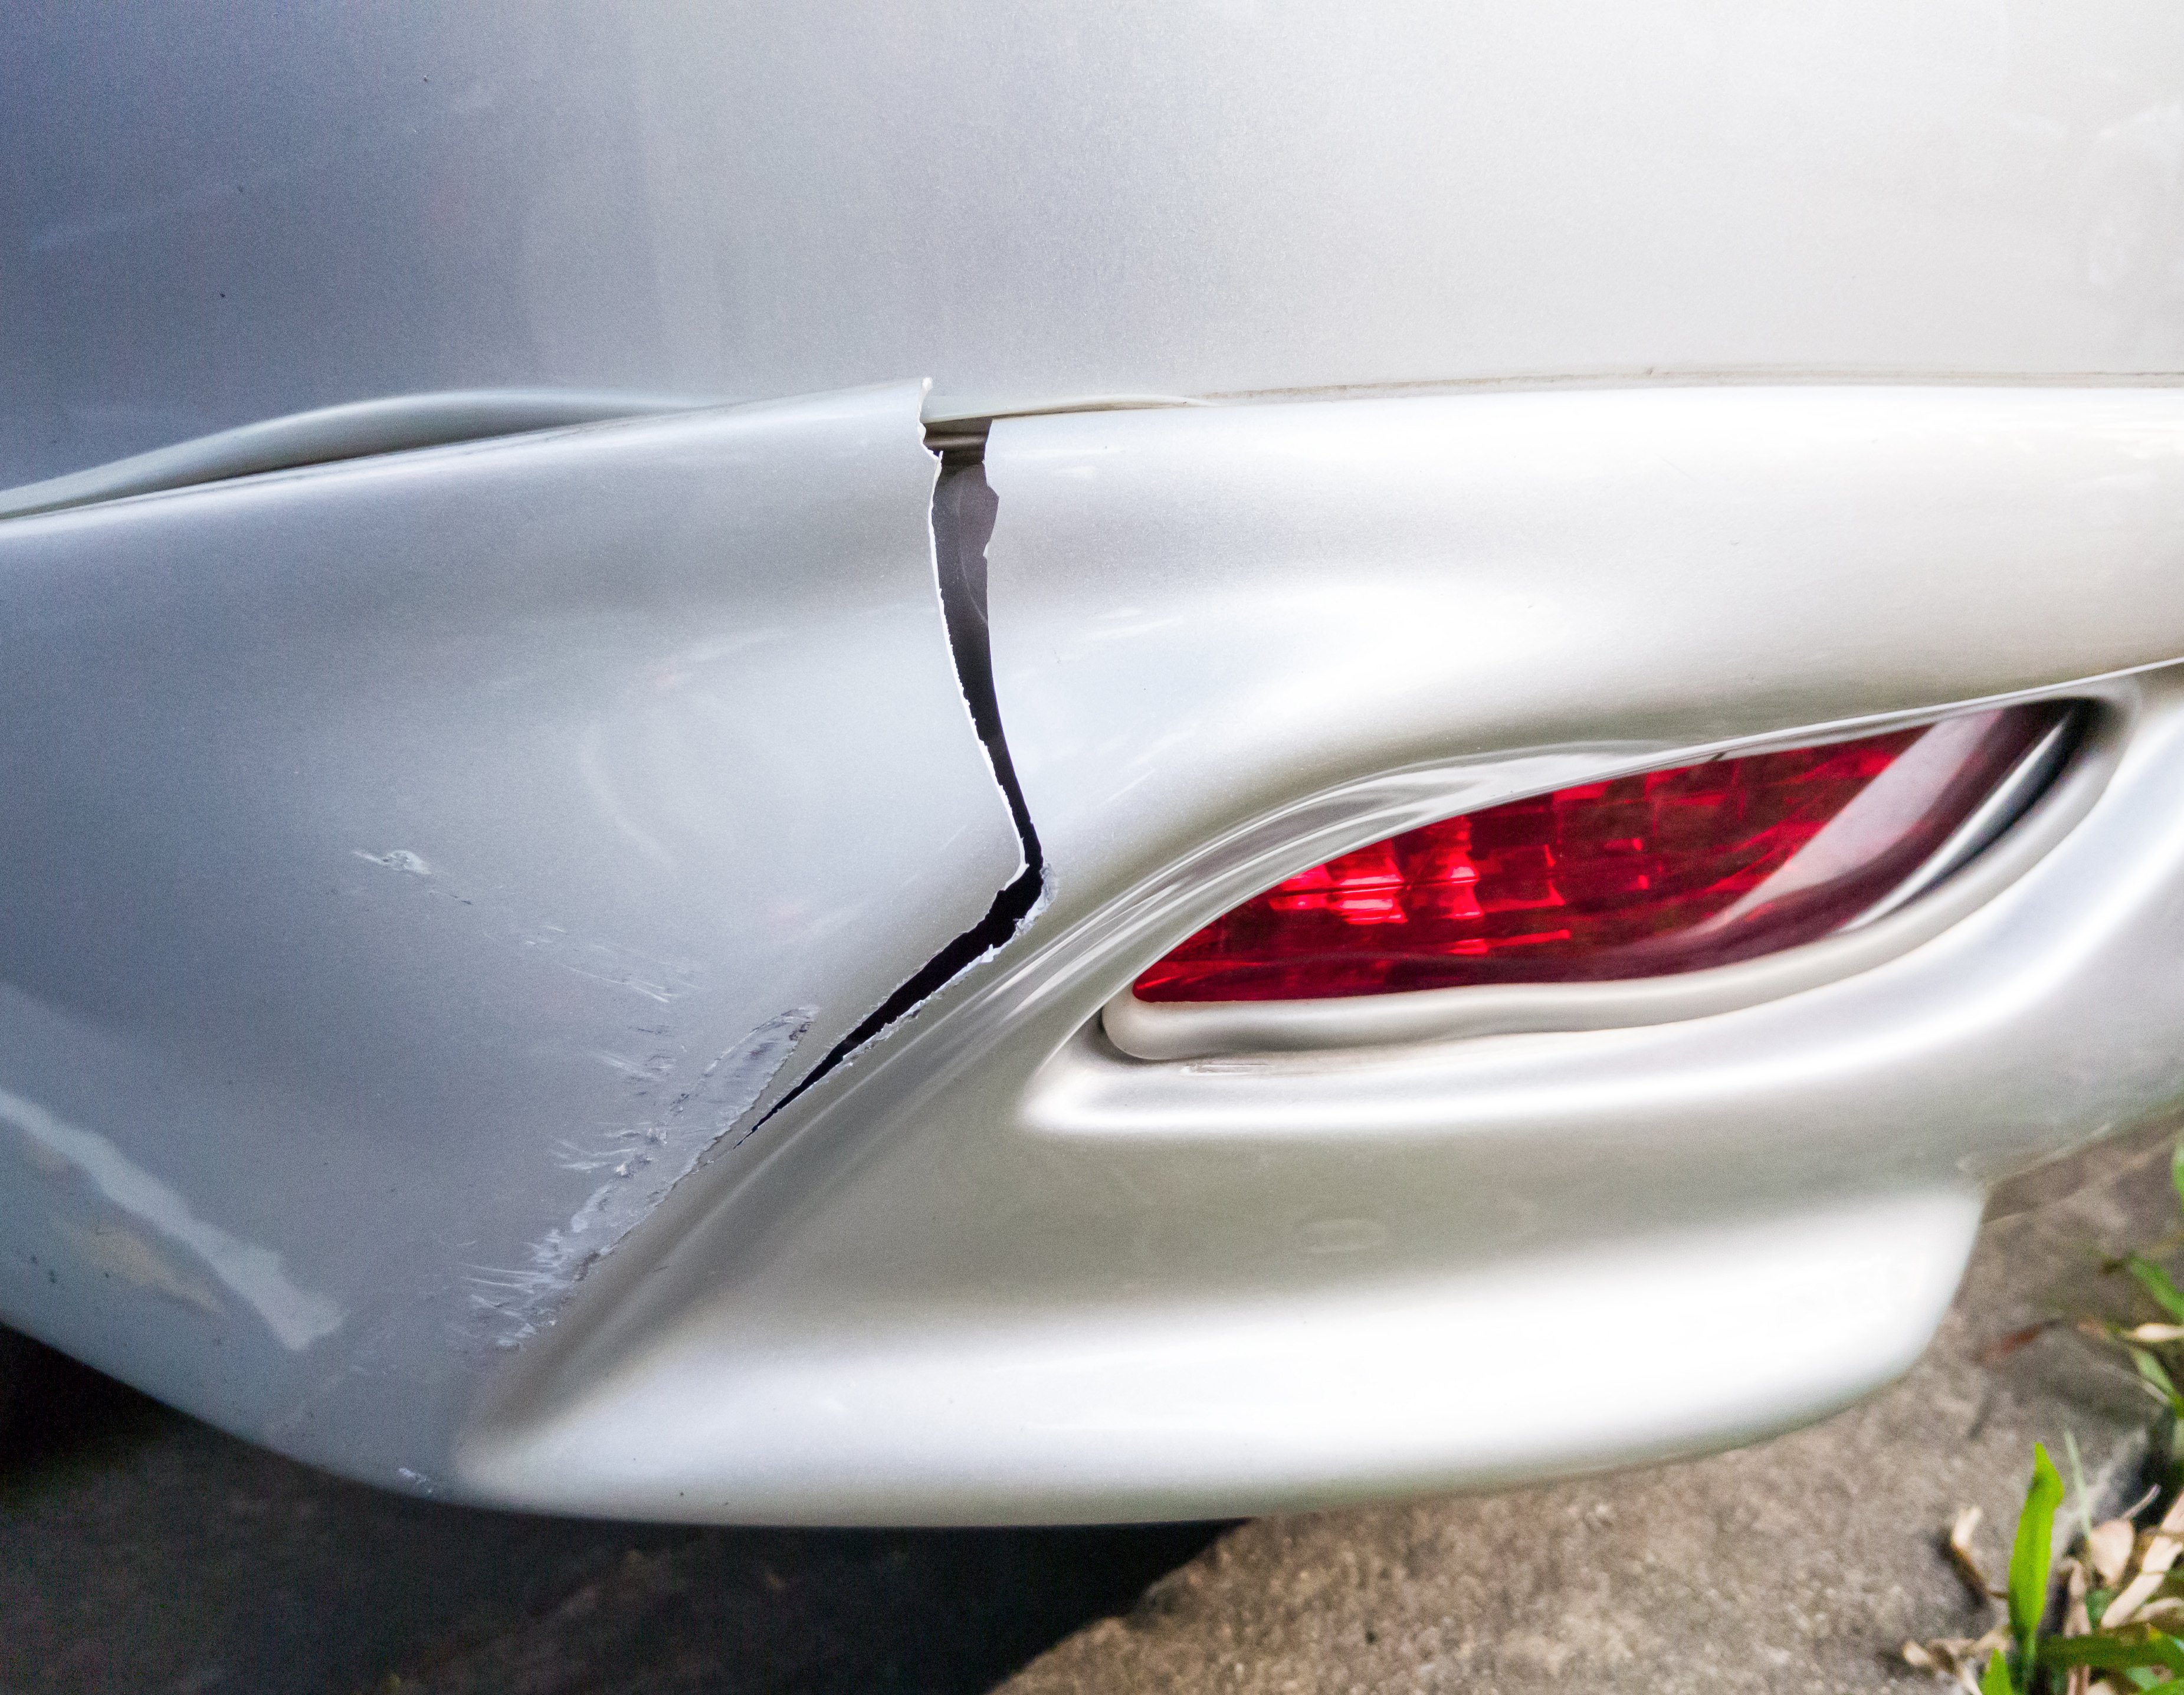 Scratch removal: first aid for your paint-damaged car